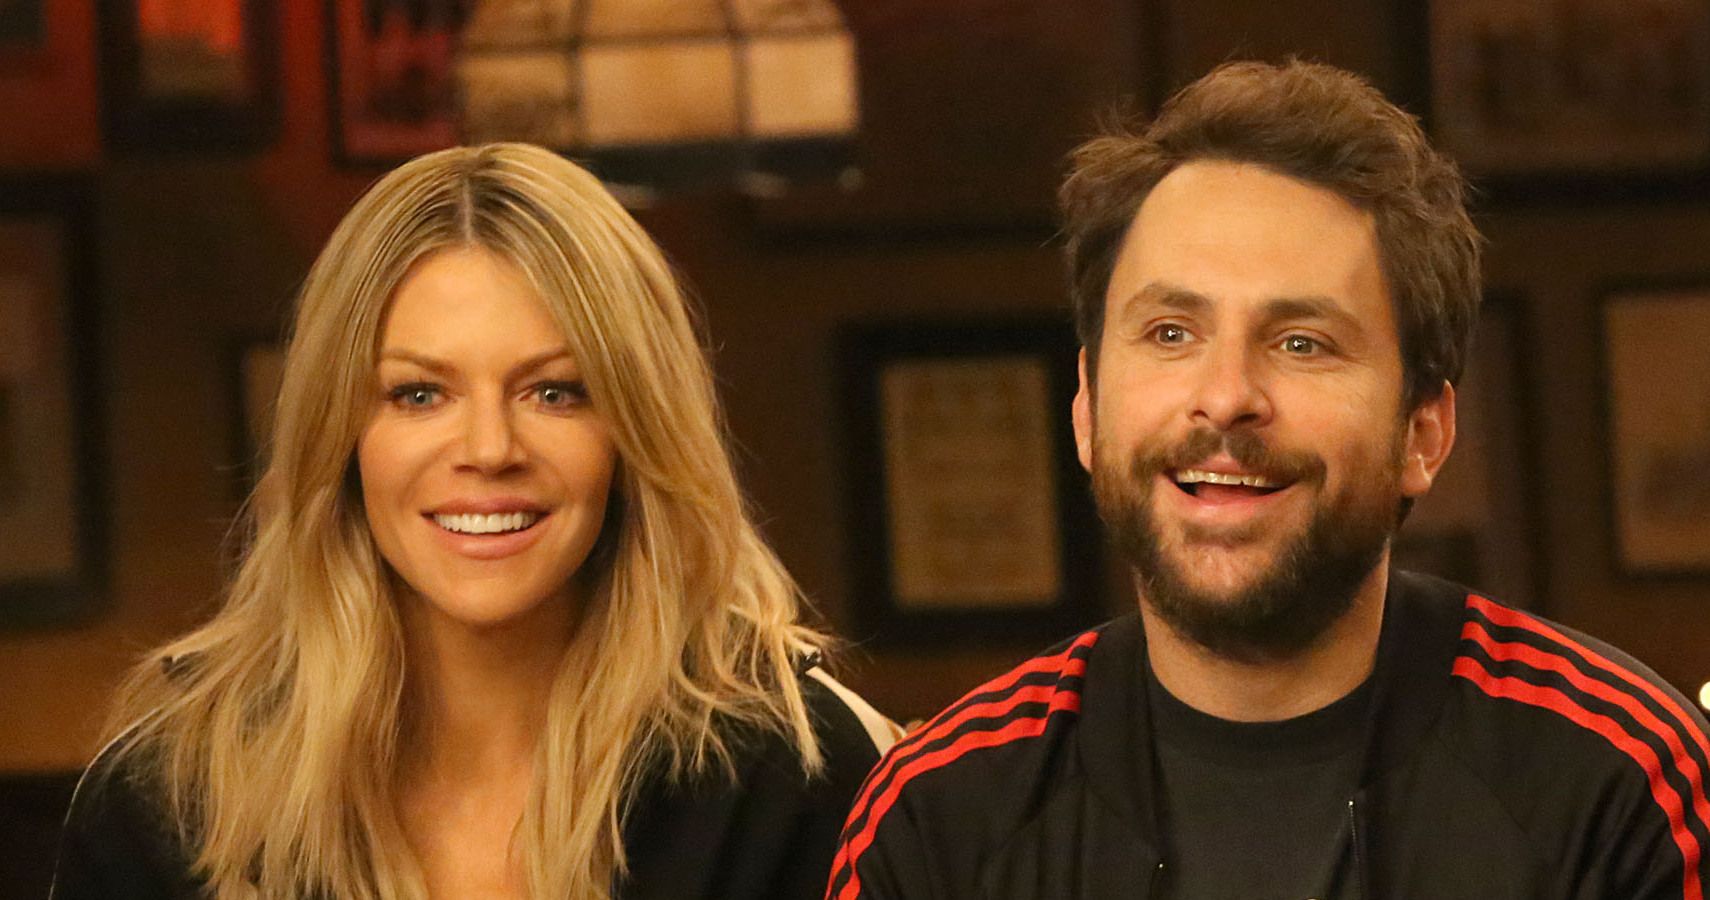 The gorgeous Charlie Day (IASIP)? Google says he's 5'6” but I've seen  people guess his height as short as 5'0” : r/Kibbe